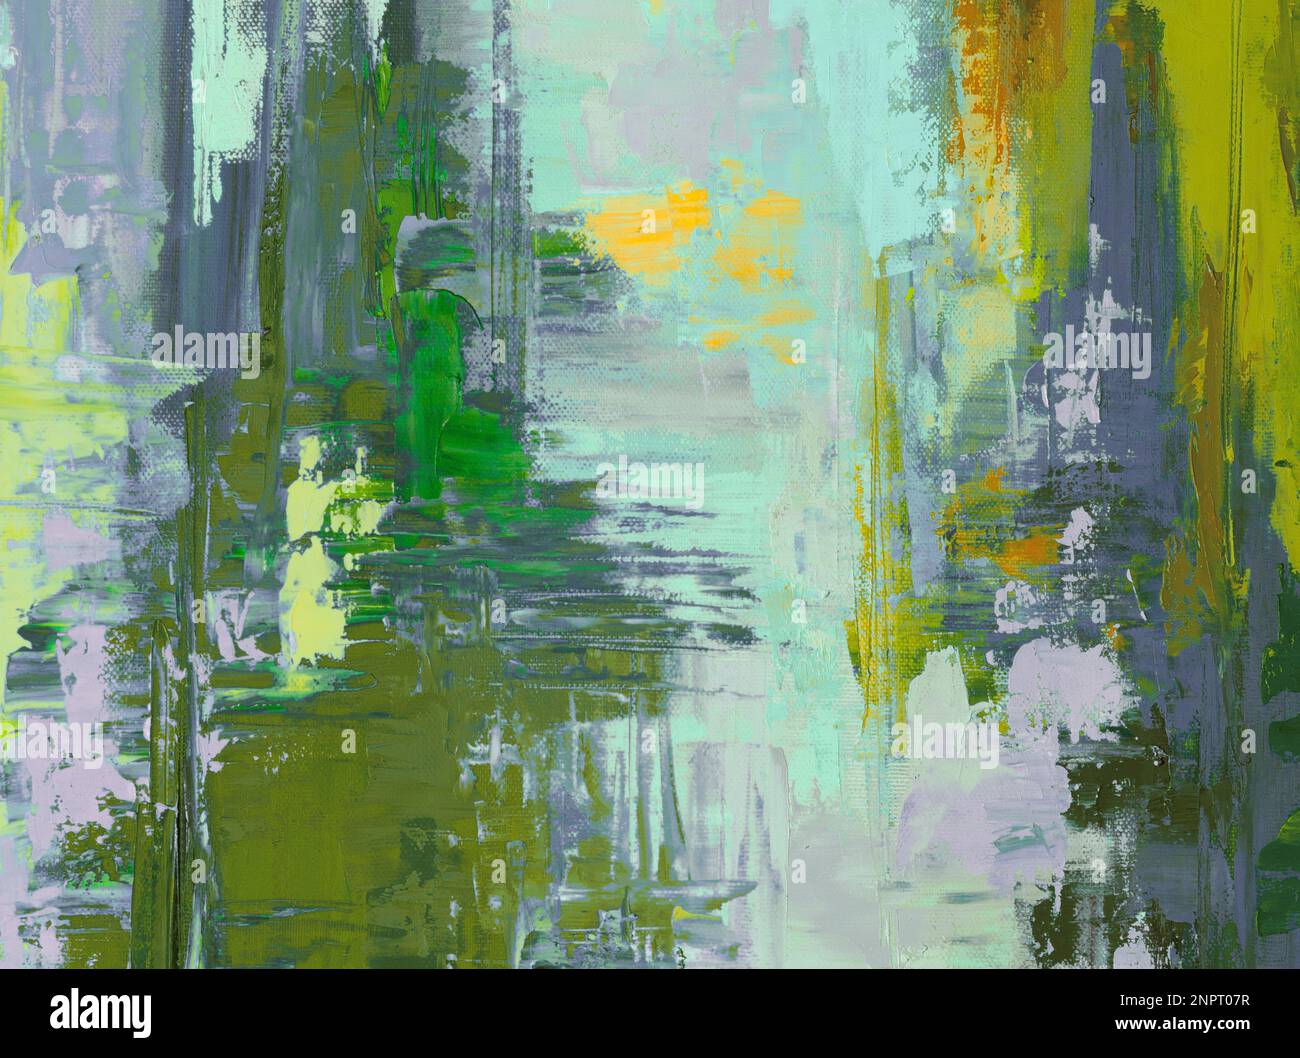 Abstract Oil Painting On Canvas Stock Photo Alamy